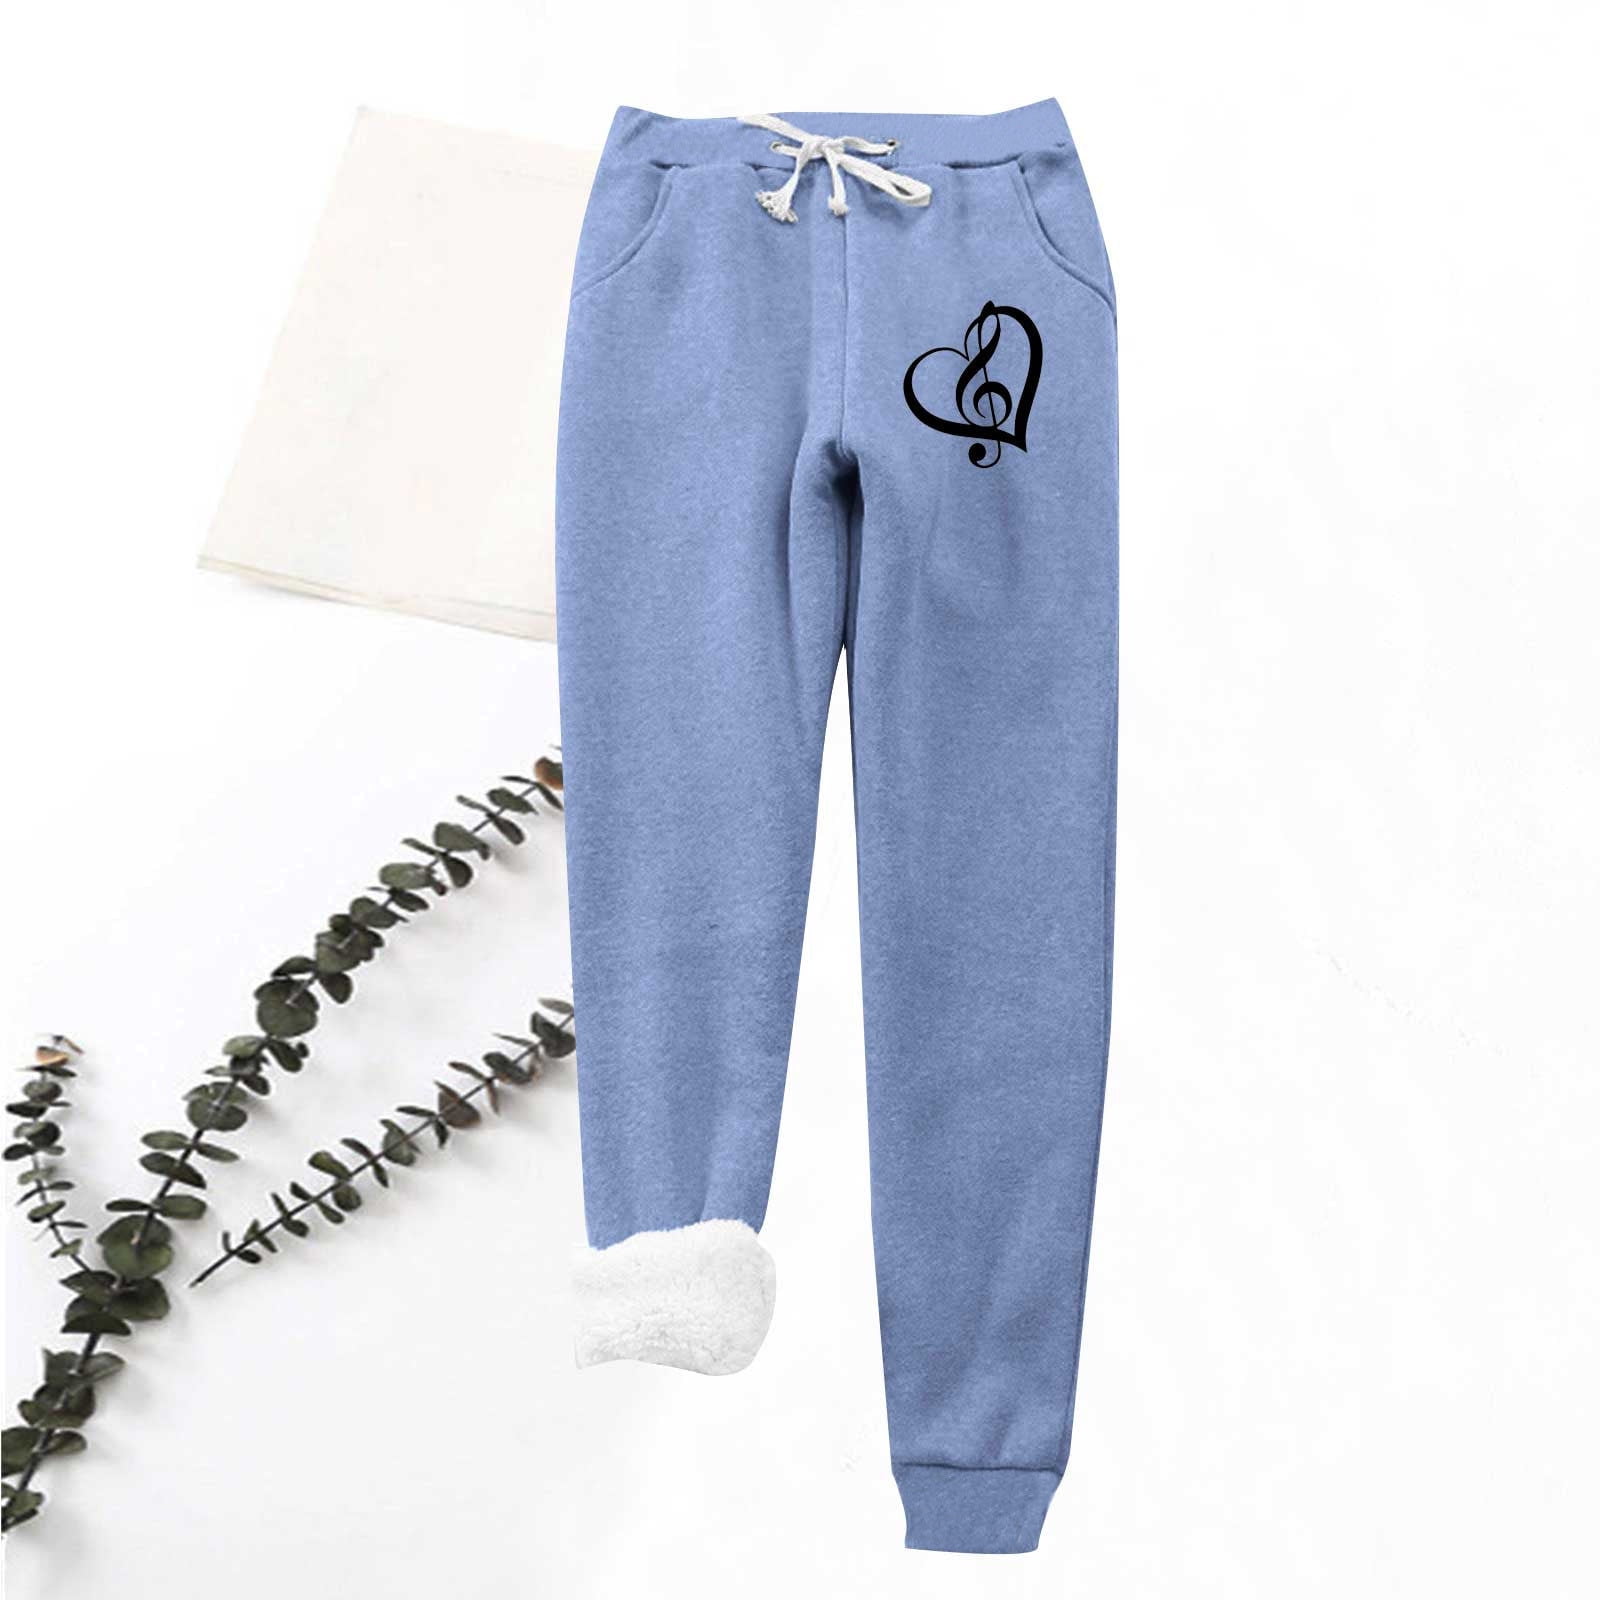 Aboser Fleece Lined Sweatpants Women Thermal Warm Thick Pants Cashmere ...